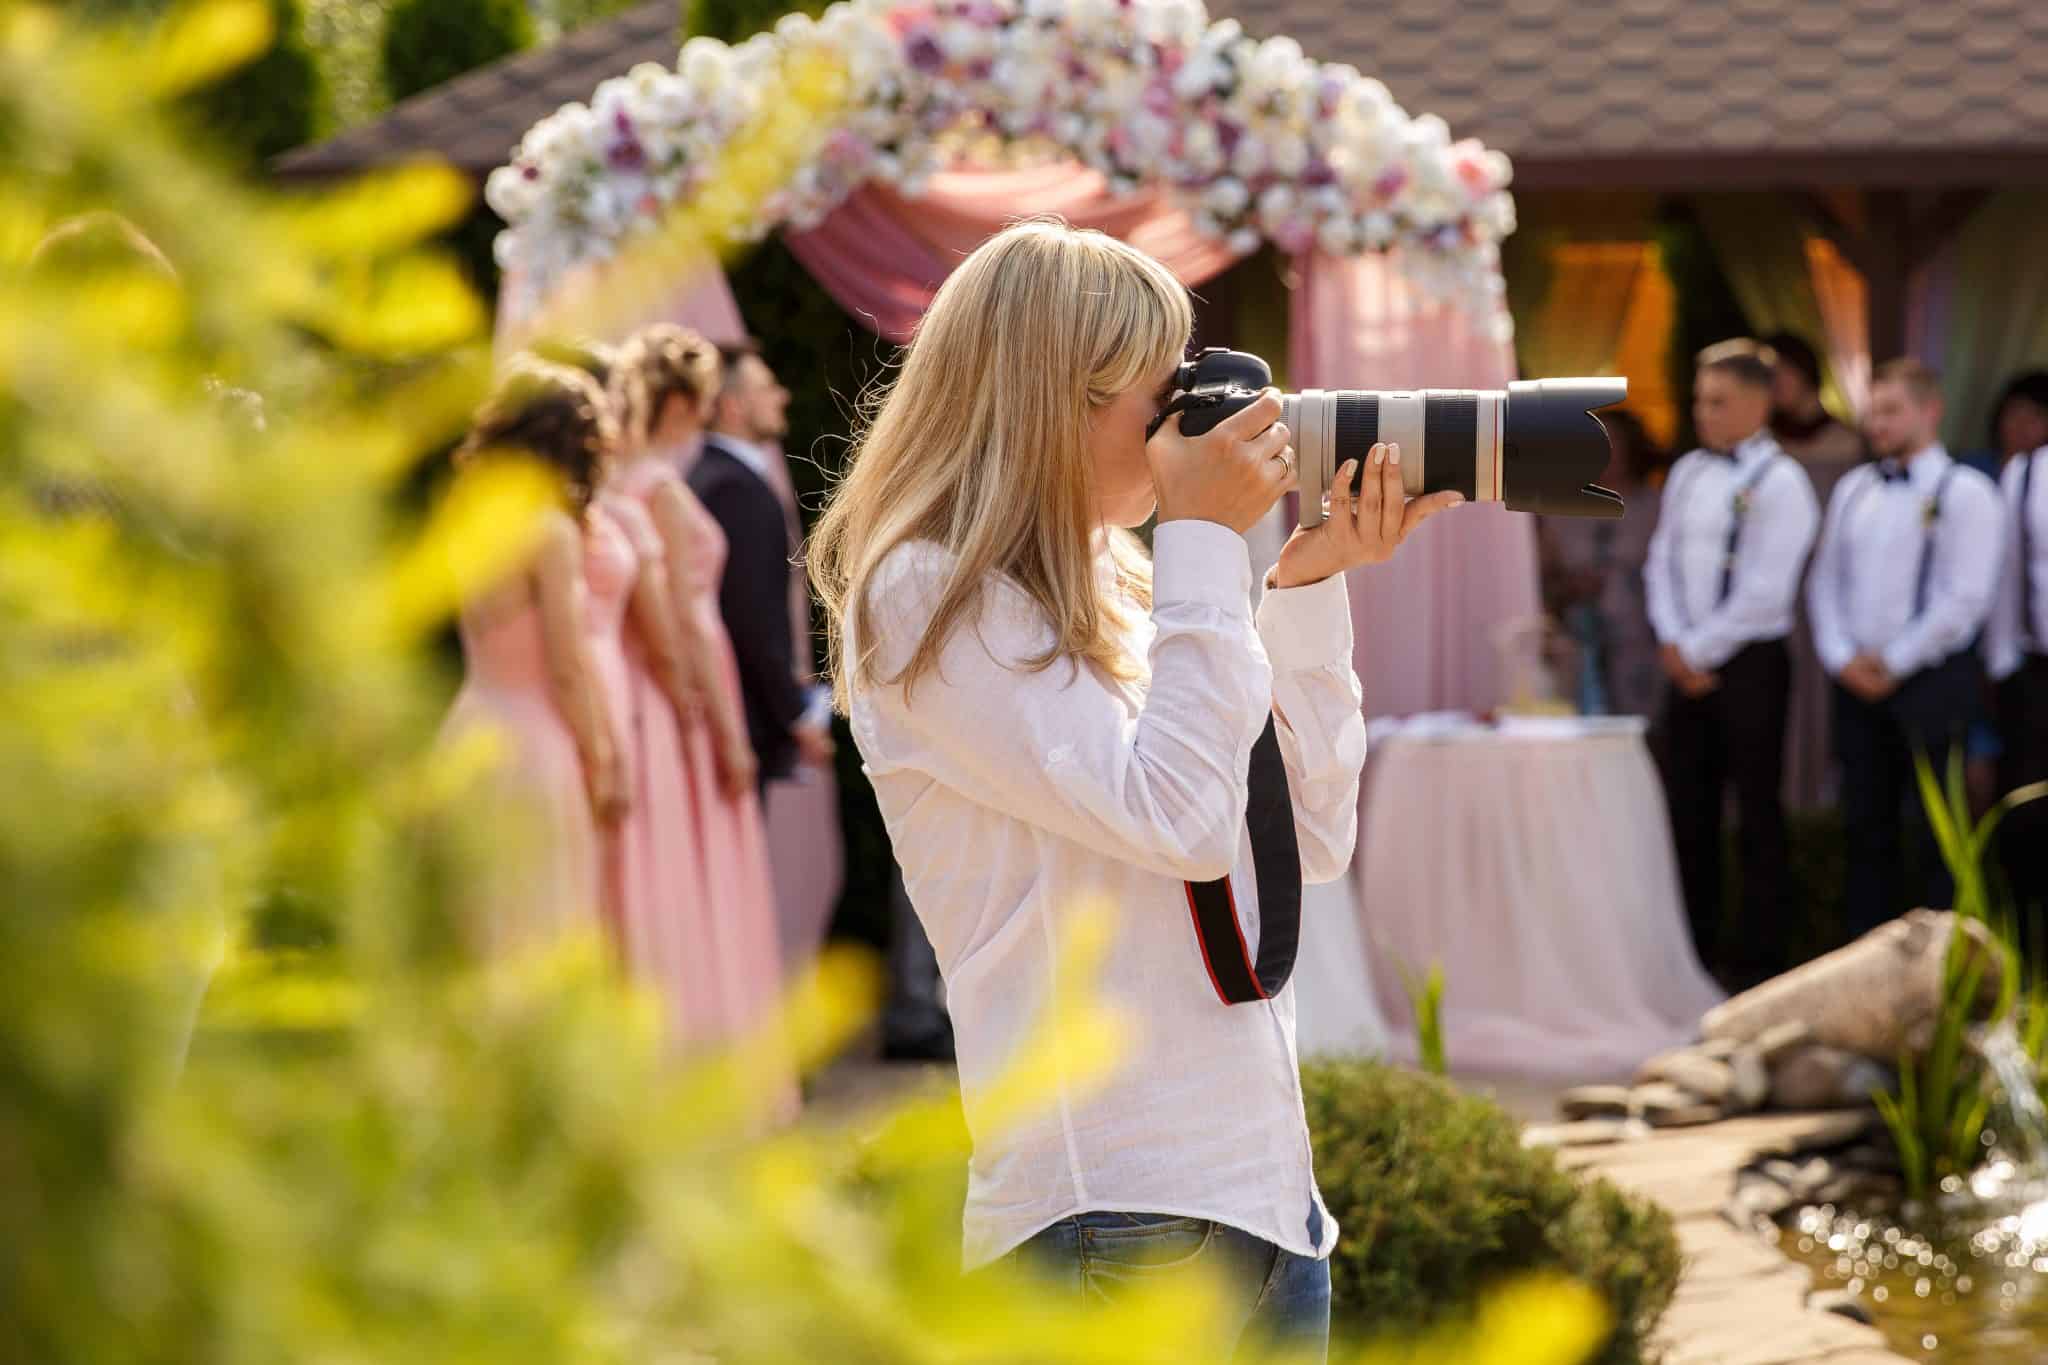 What Should a Photographer Wear to a Wedding? Best Tips